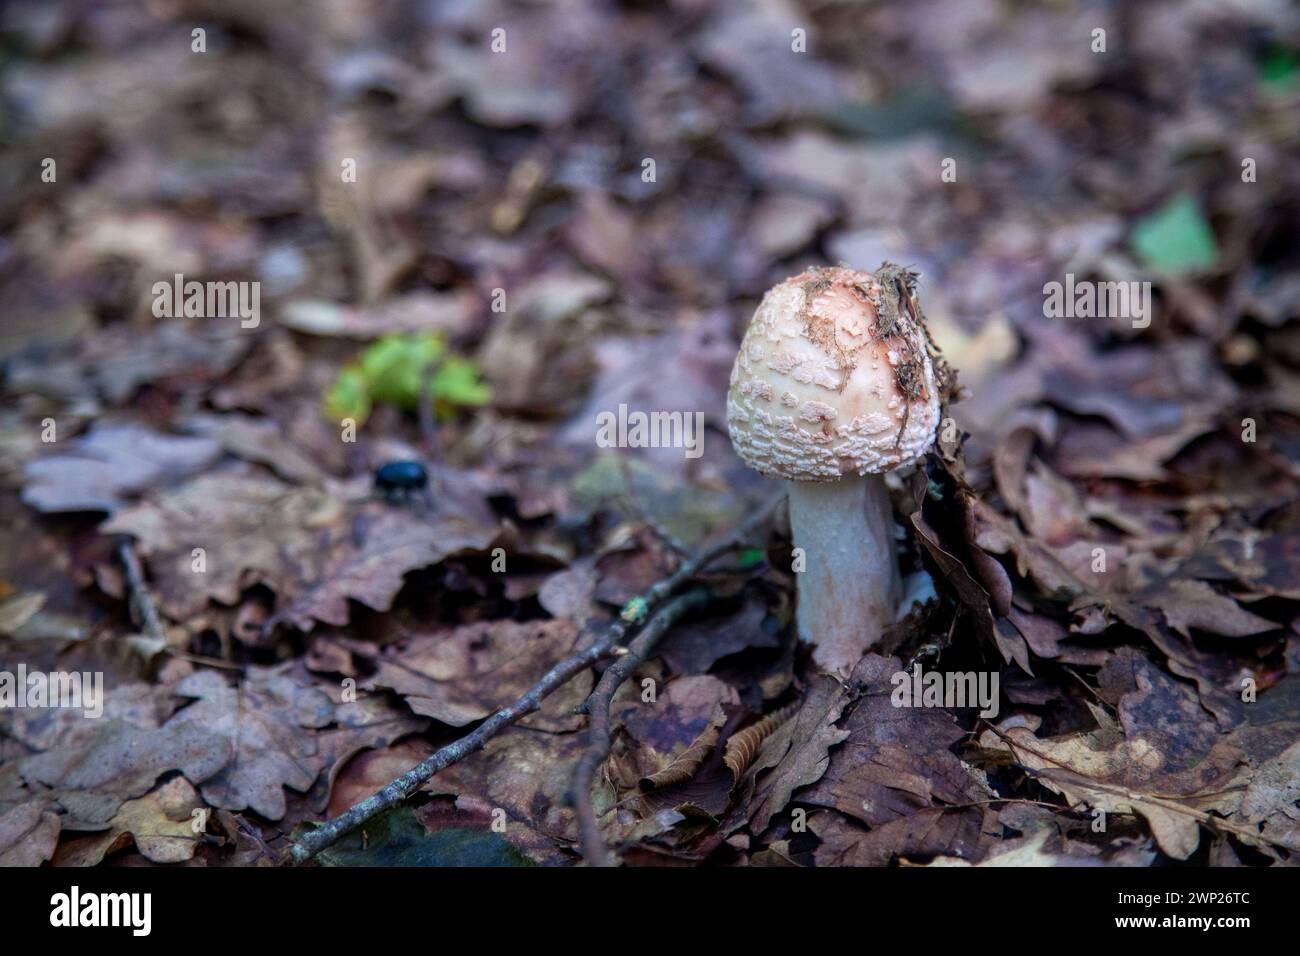 Edible mushroom Amanita rubescens commonly known as blushing amanita. Wild mushroom growing among fallen leaves in autumn forest. Stock Photo